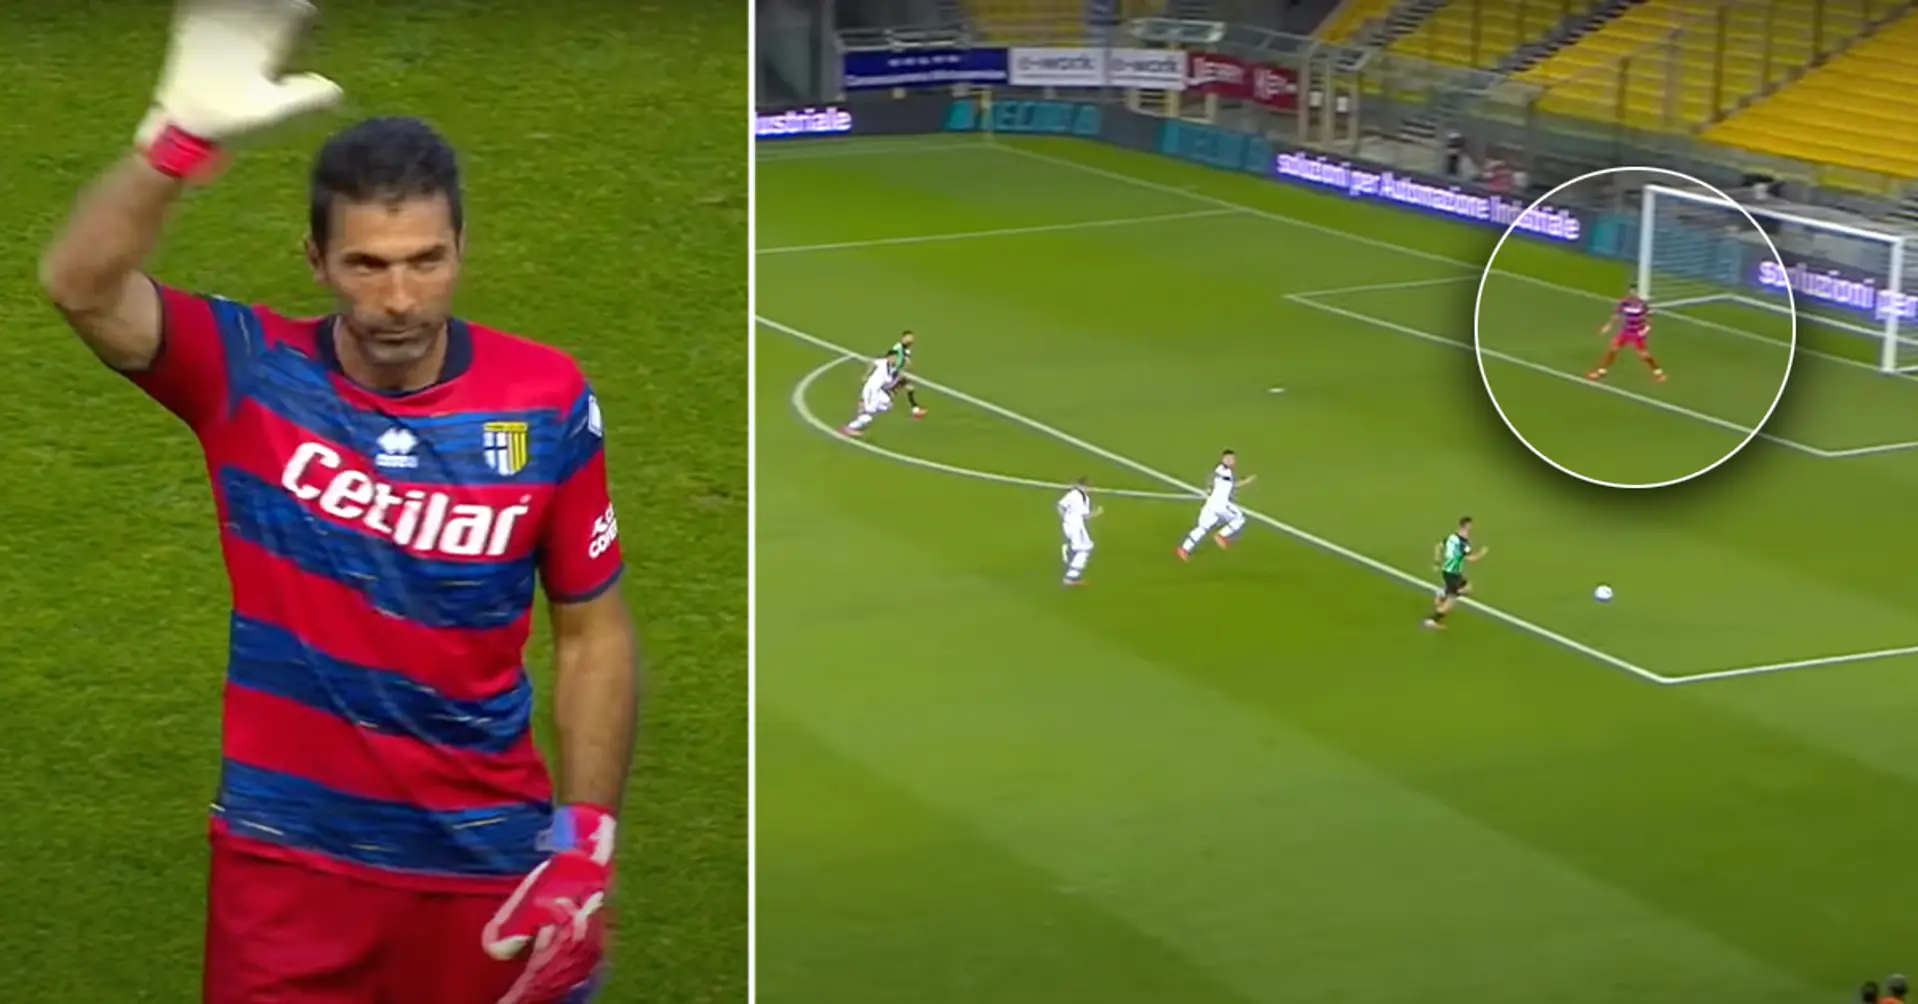 Superman returns. 43-year-old Gianluigi Buffon pulls off a miracle save for Parma